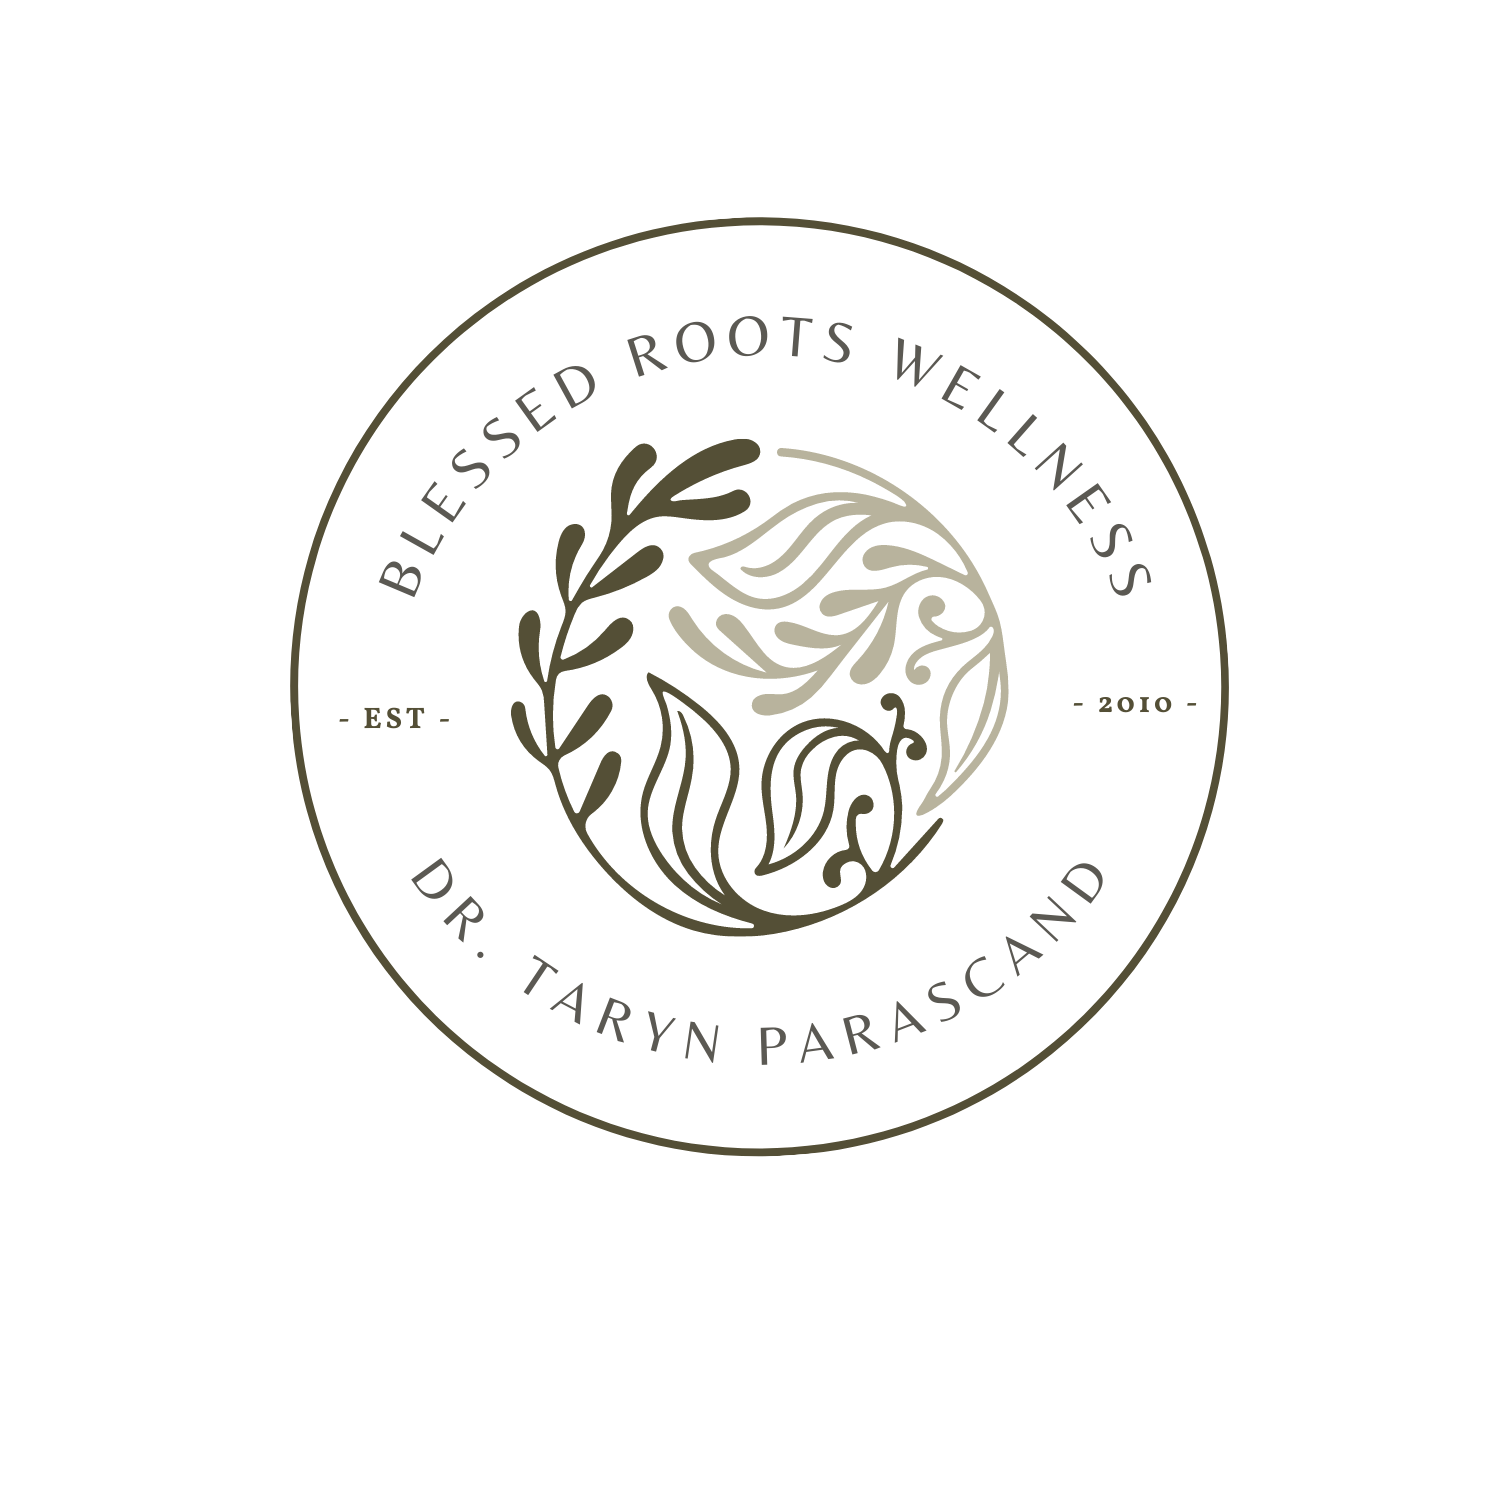 Blessed Roots Wellness